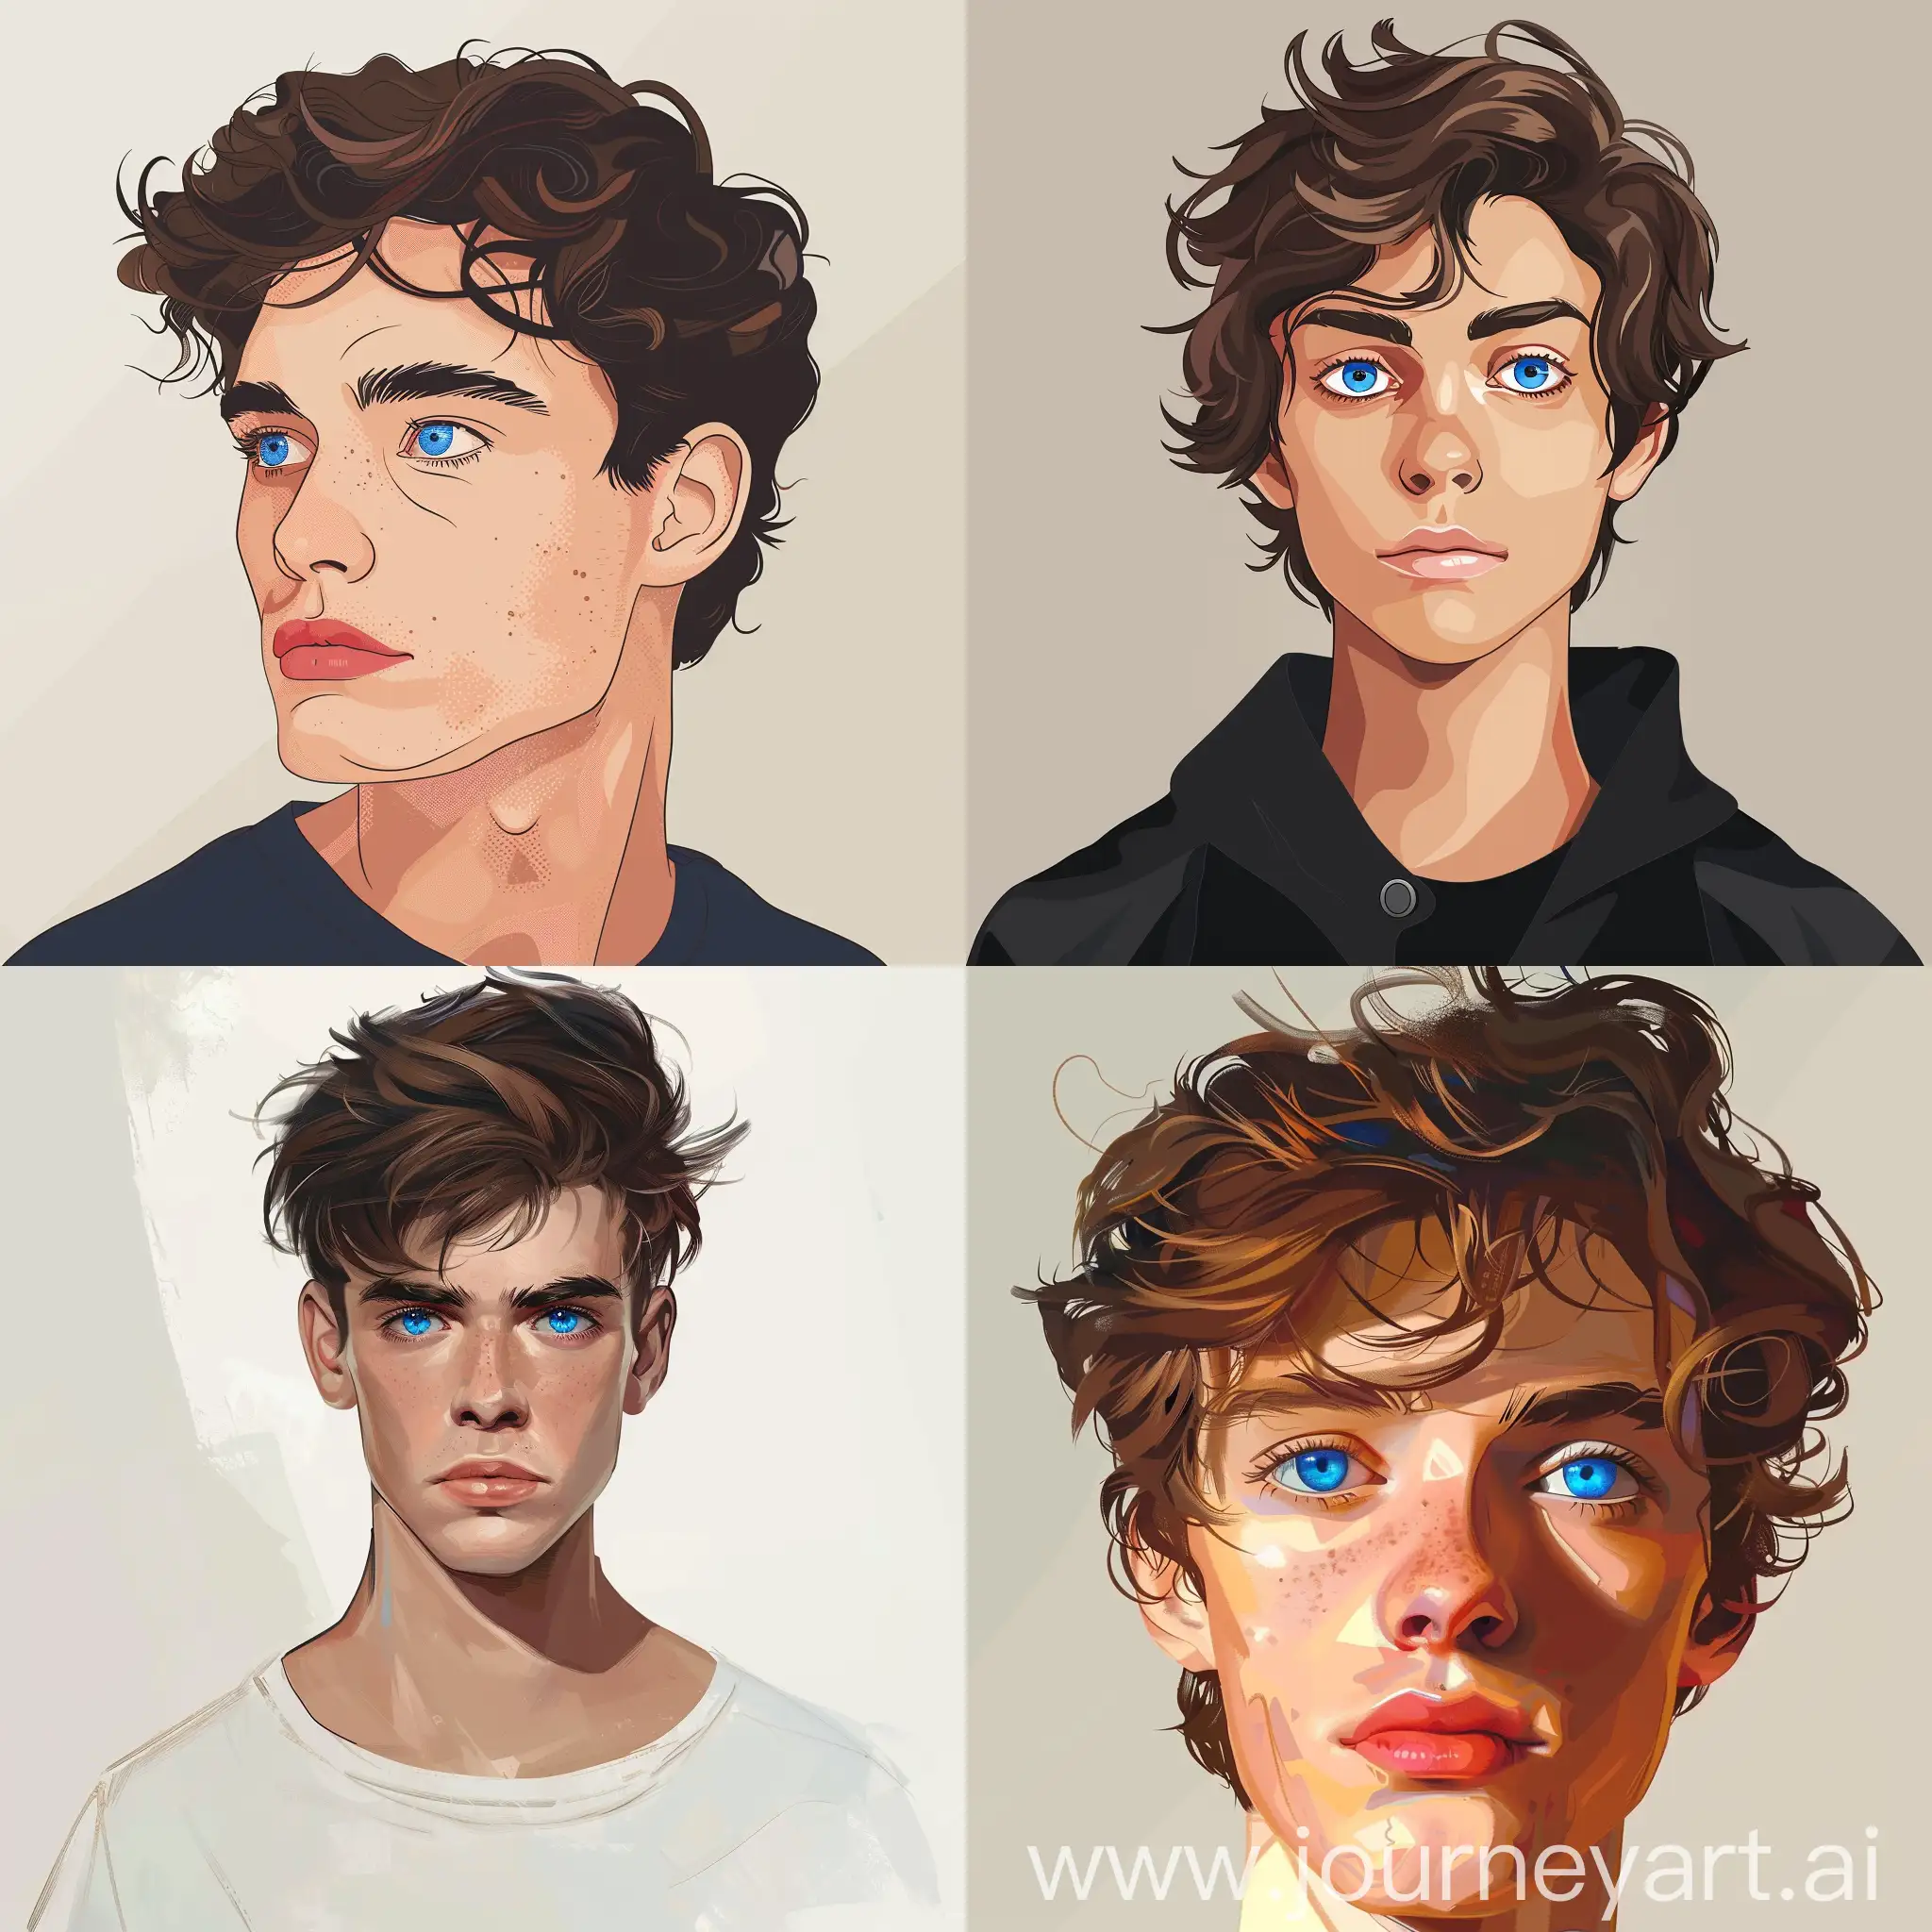 A Young man with blue eyes in 2d illustration style